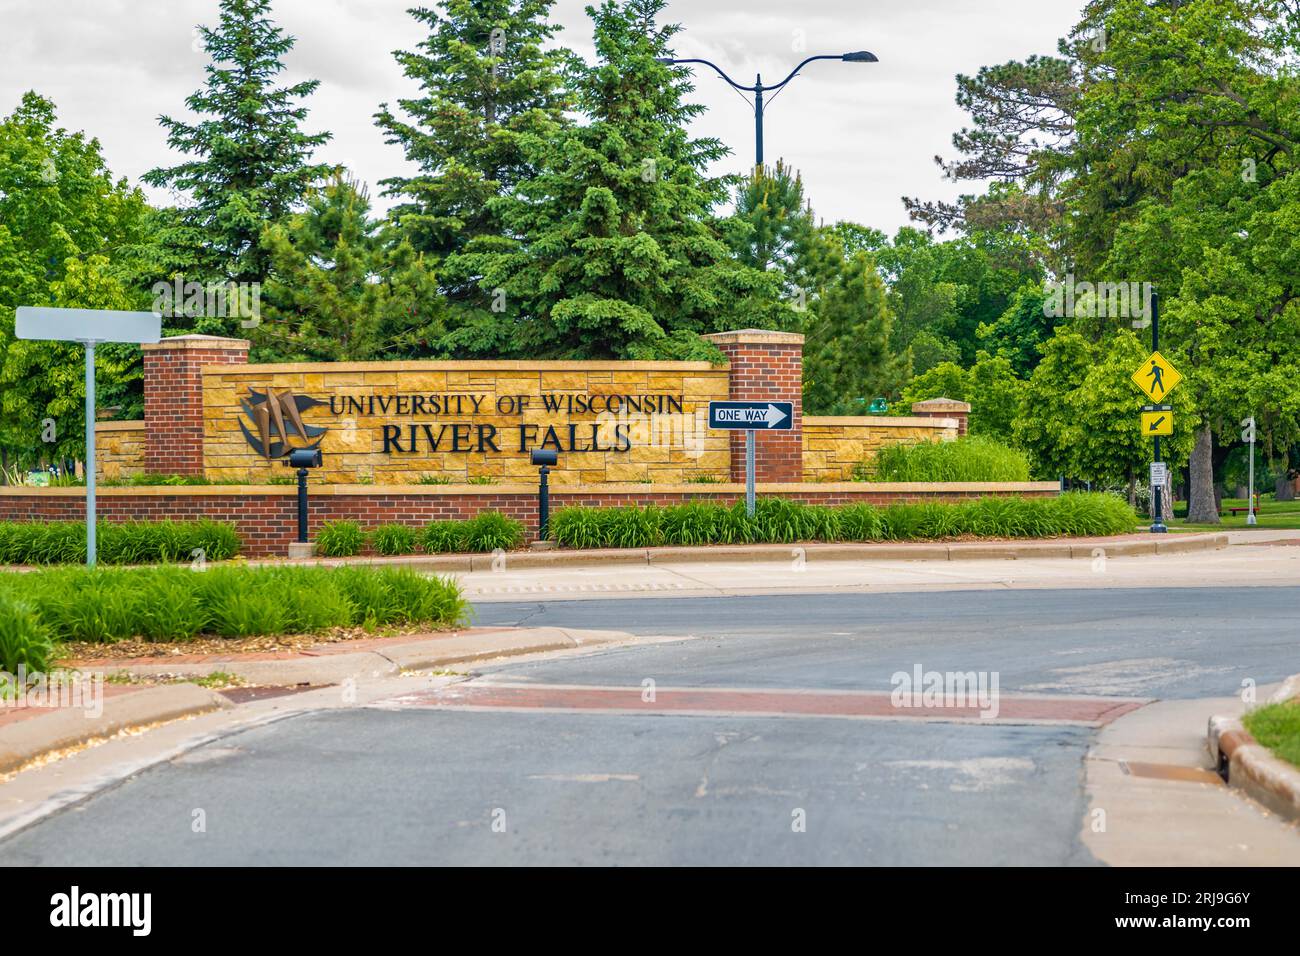 River Falls, WI, USA - June 5, 2022: The University of Wisconsin River Falls Stock Photo